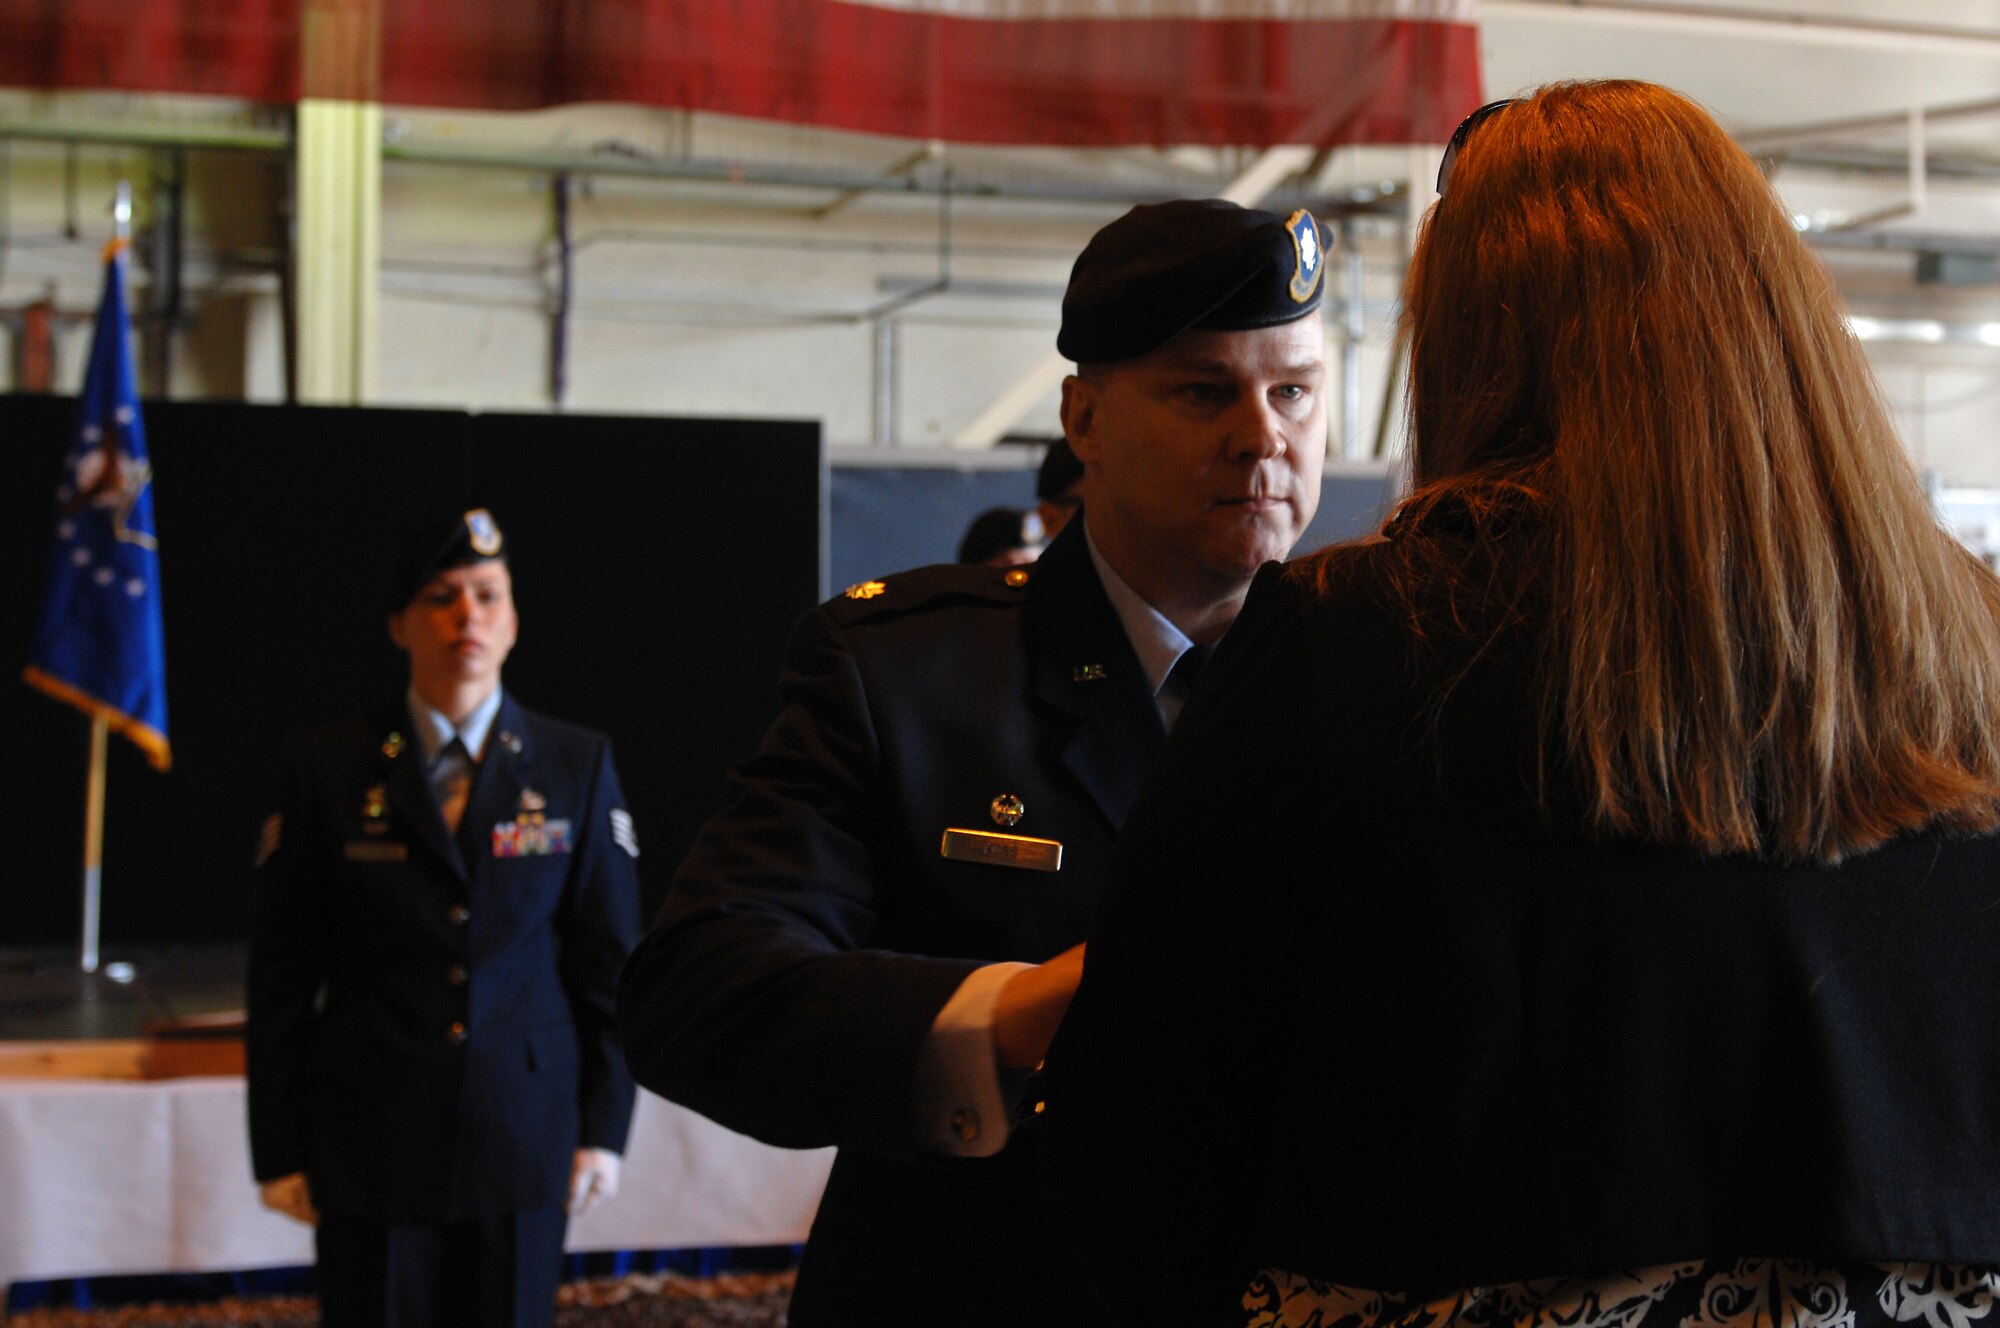 ROYAL AIR FORCE LAKENHEATH, England - Lt. Col. Michael Ross, 48th Security Forces Squadron commander, presents the American flag to Trish Alden, wife of Senior Airman Nicholas J. Alden, a security forces journeyman killed in action during a shooting incident at Frankfurt International Airport, Germany, March 2, 2011, during a memorial service in Hangar 7 on March 11, 2011. More than 500 Airmen, family and friends were in attendance. (U.S. Air Force photo/Tech. Sgt. Lee A. Osberry Jr.)